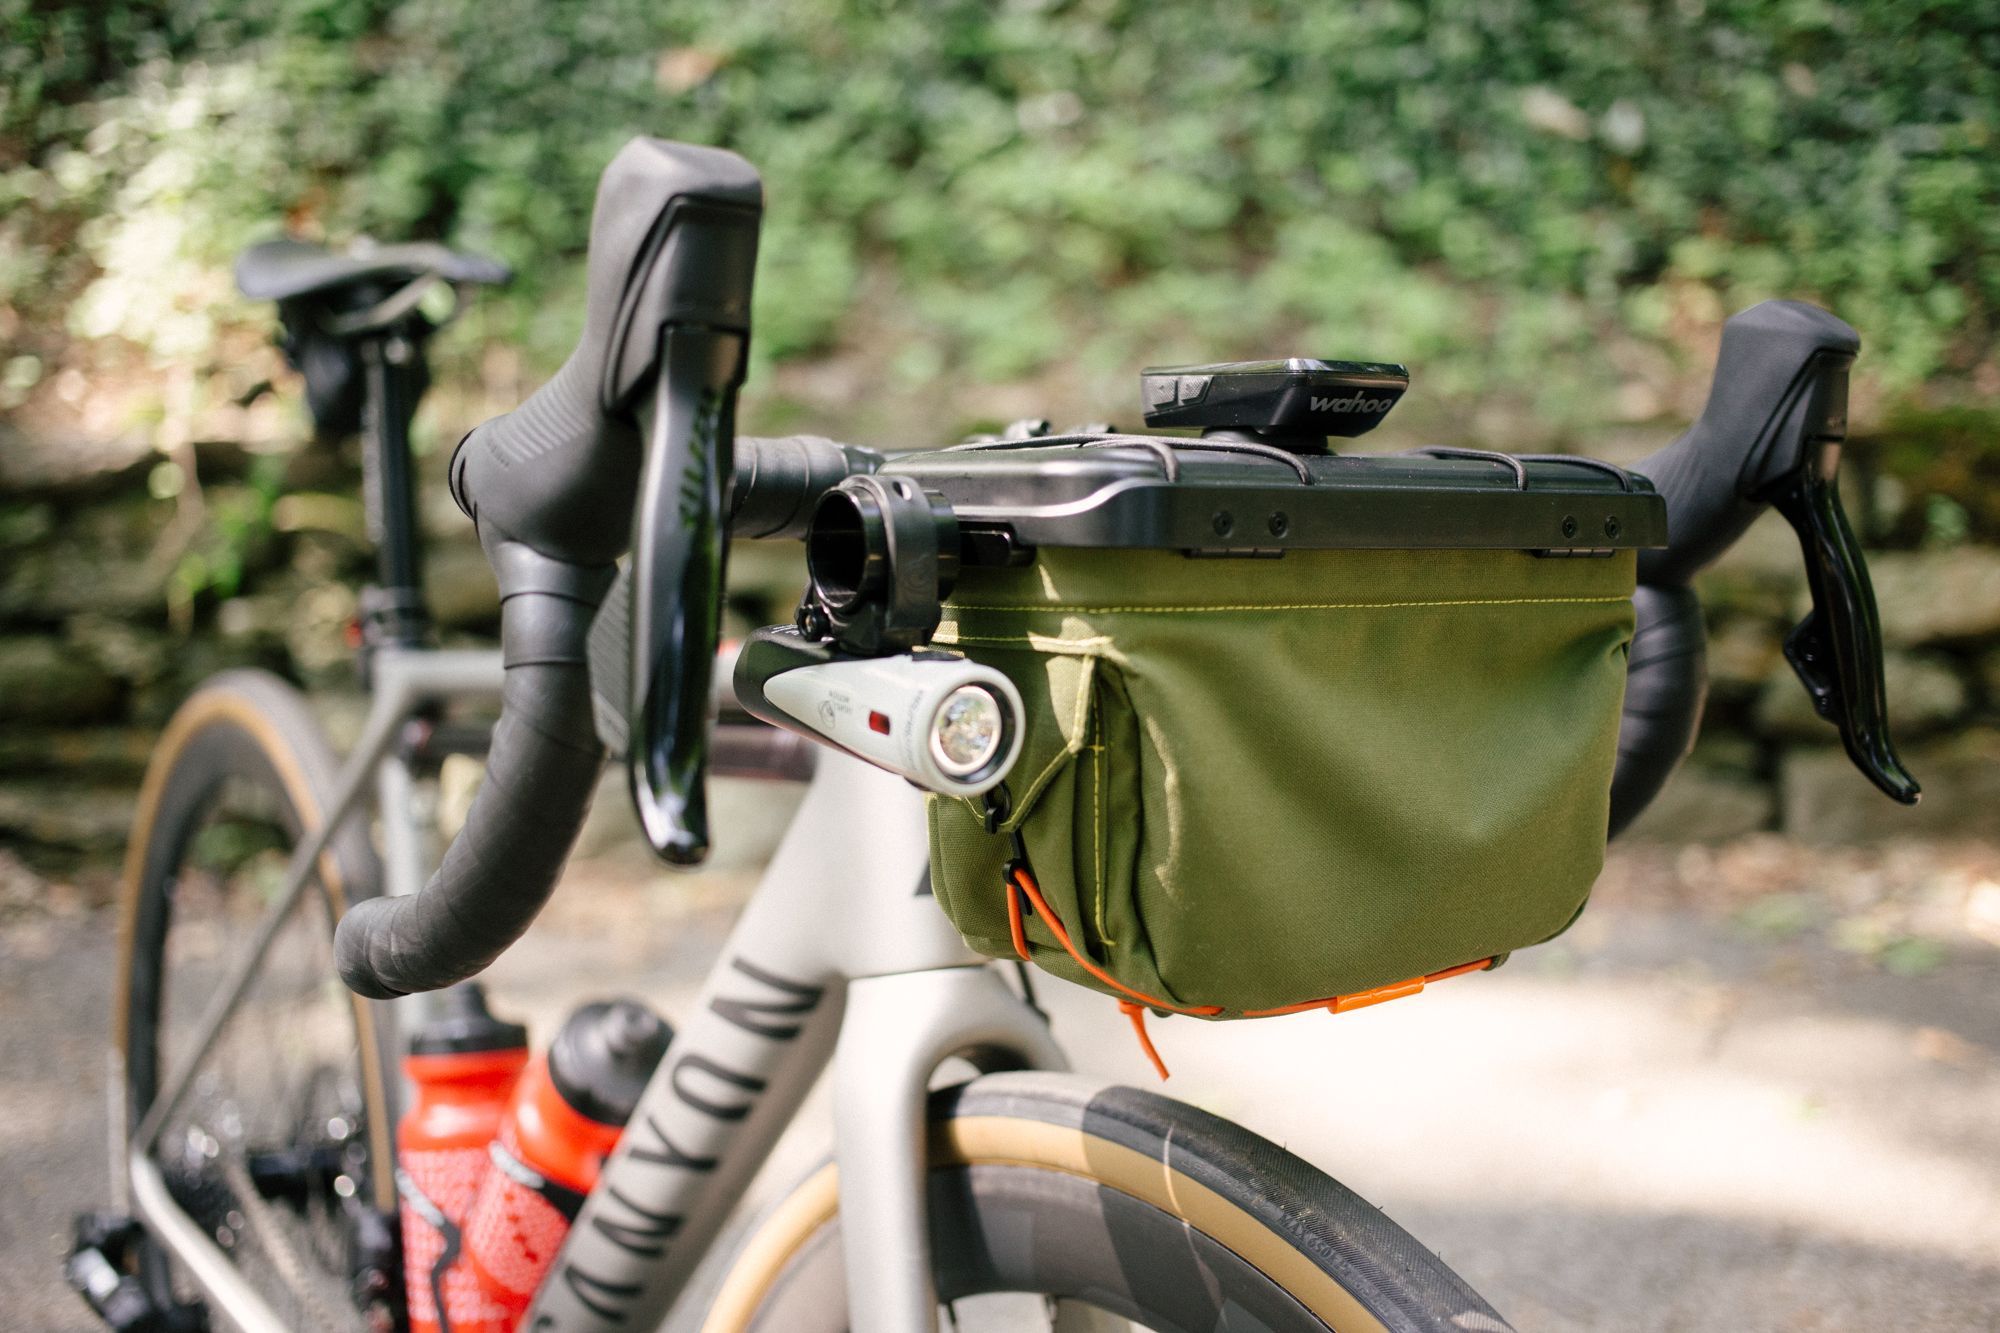 Lead Out! Mini Handlebar Bag Review - feat. Waterproof Zipper + Reflective  Stripe + Quick Release - YouTube